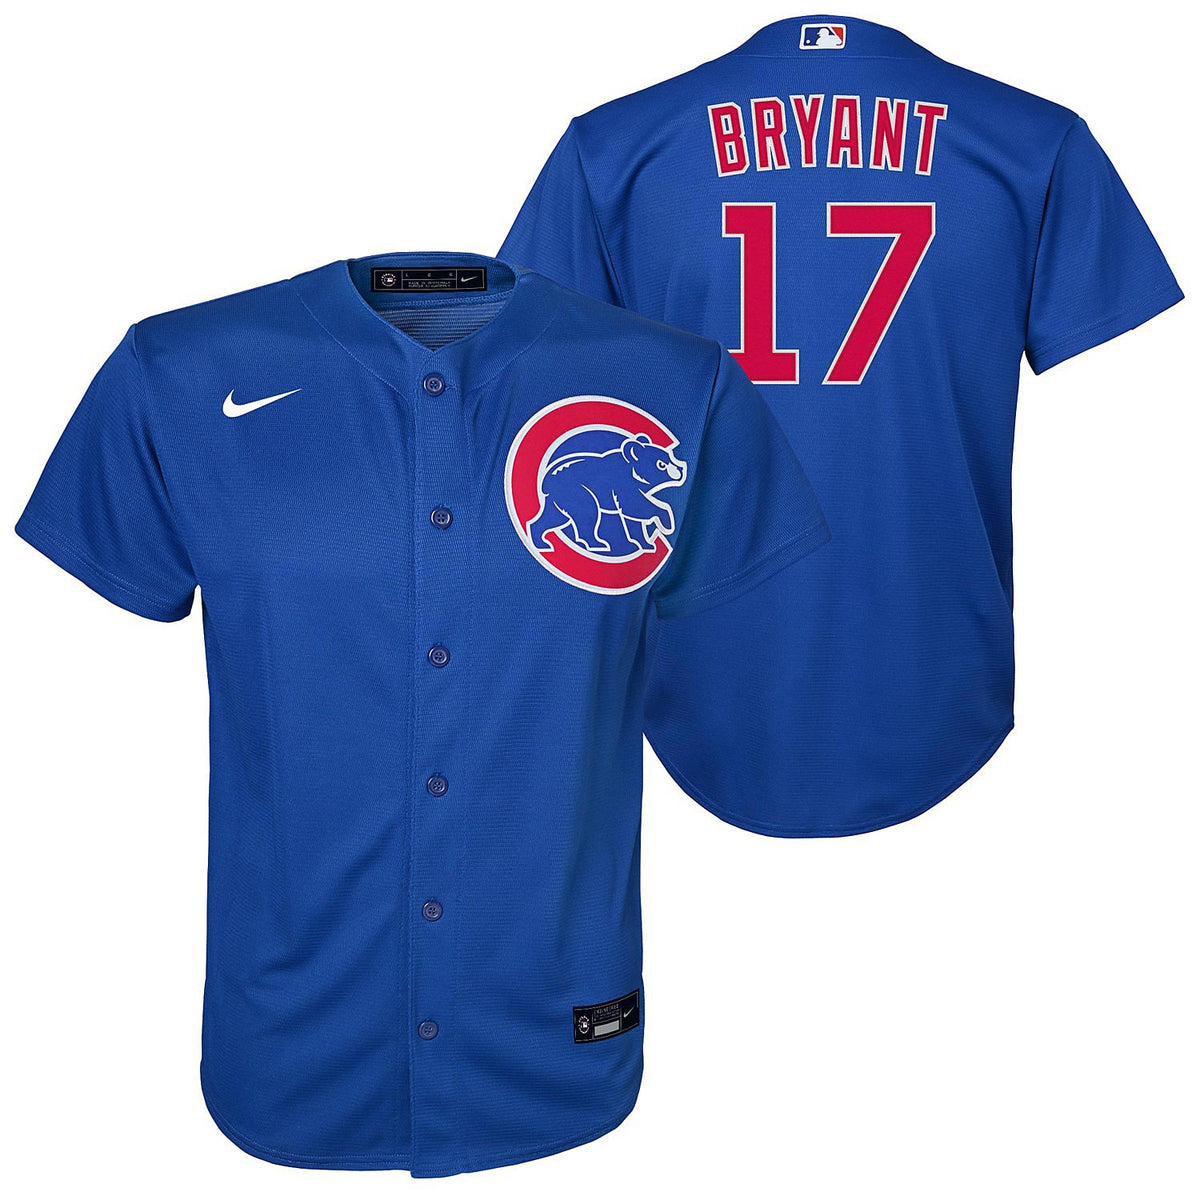 Nike MLB Chicago Cubs Kris Bryant Home Twill Youth Jersey White/Blue Medium 10-12 Years